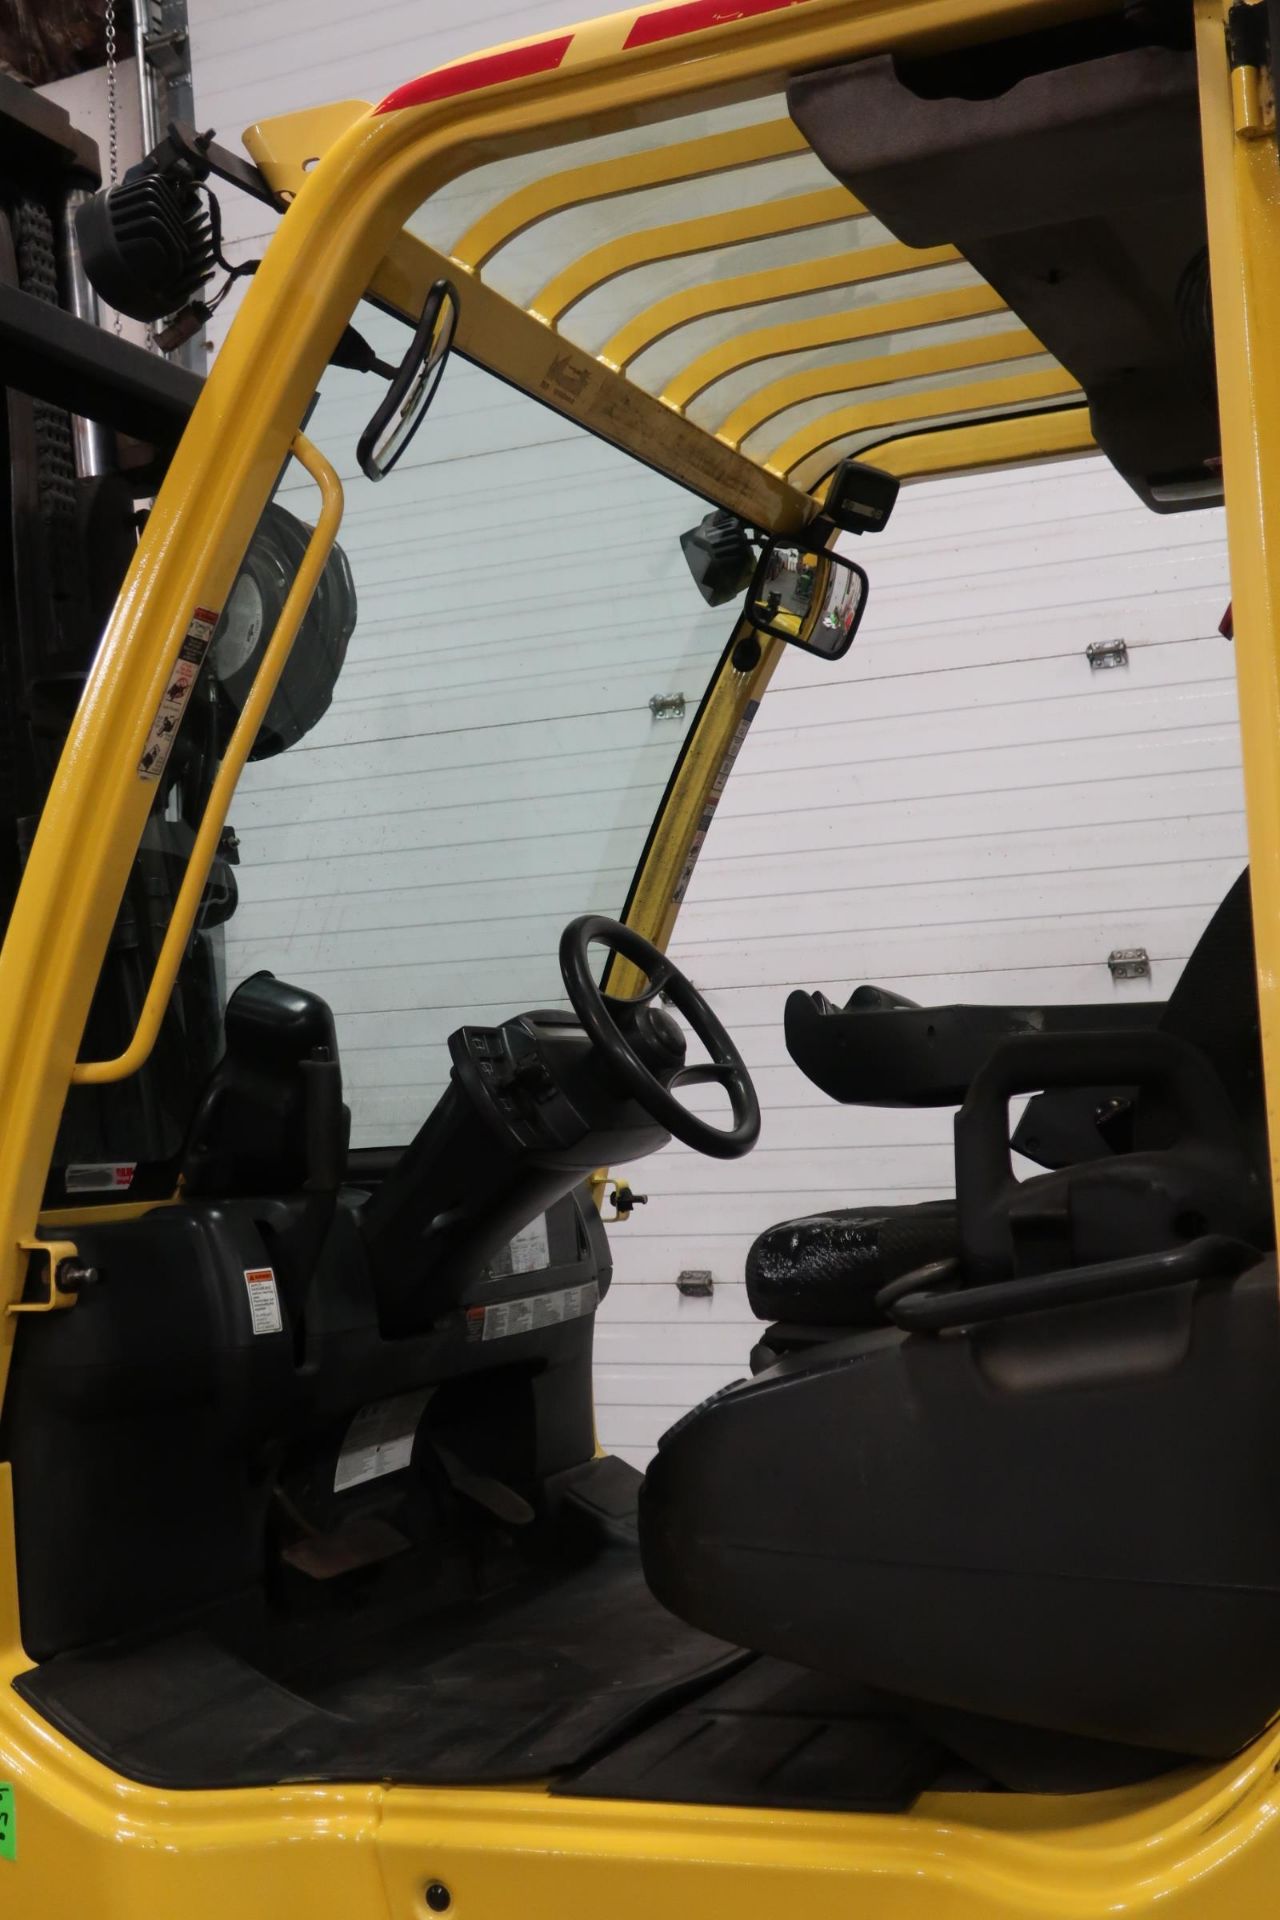 FREE CUSTOMS - 2015 Hyster 15500lbs Capacity OUTDOOR Forklift with Fork Positioner, Sideshift & - Image 2 of 5